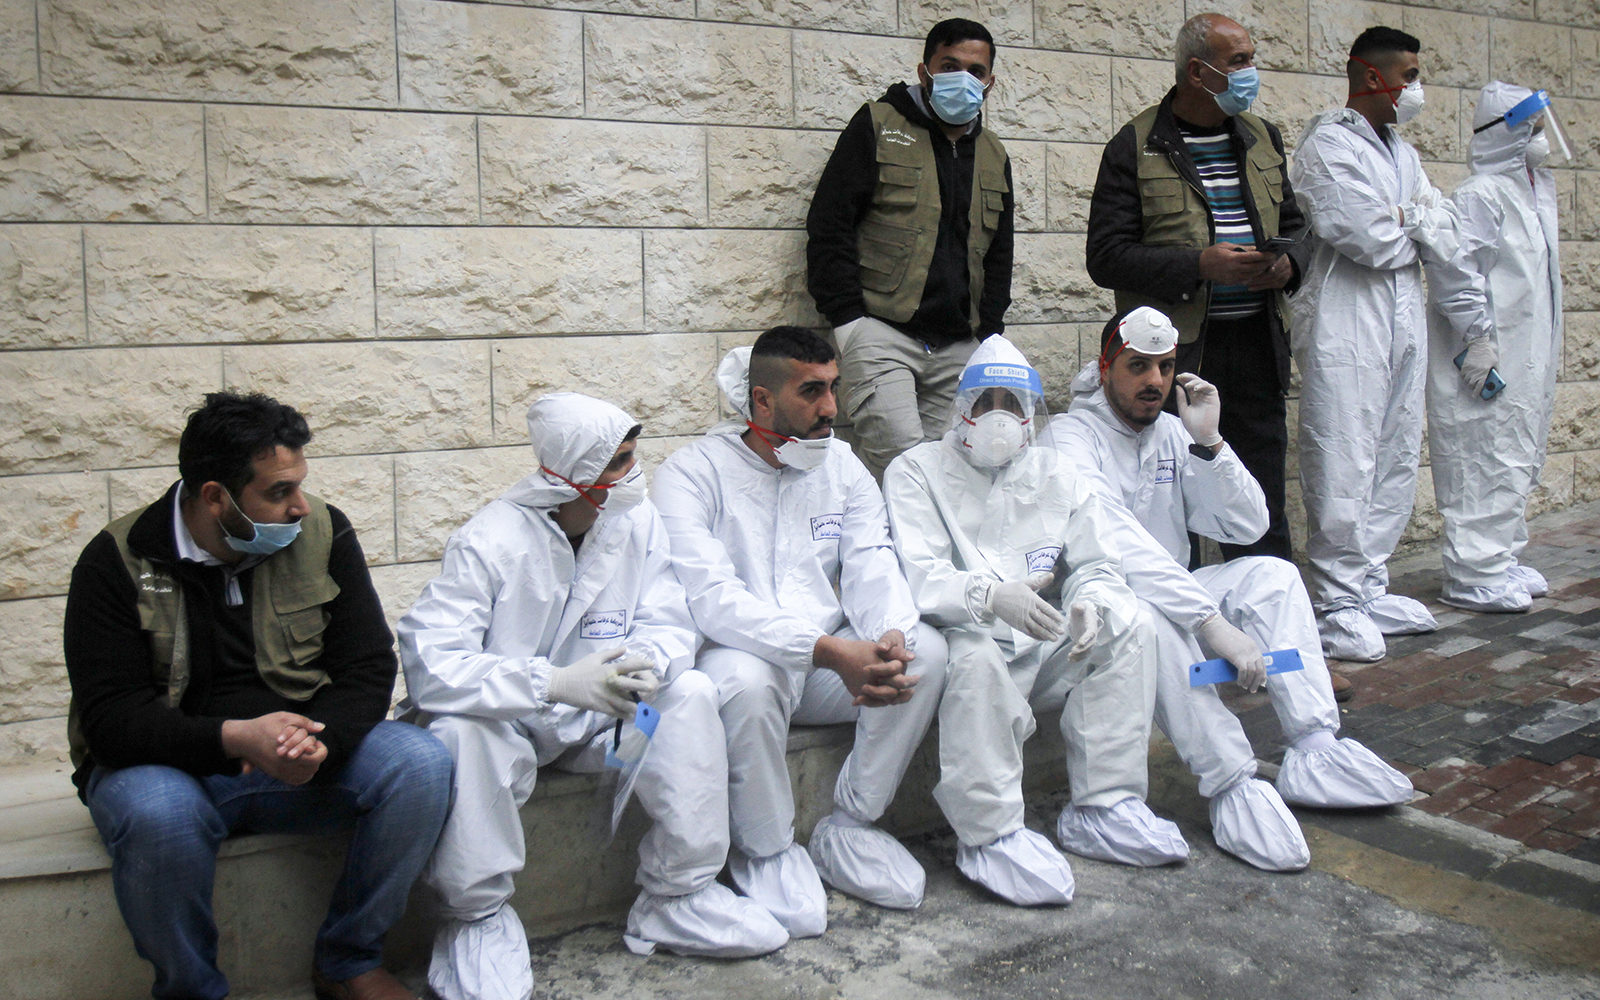 Palestinians sit as PA Prime Minister Mohammed Shtayyeh opens a hospital for COVID-19 in the West Bank city of Nablus, on January 16, 2021. (Nasser Ishtayeh/ Flash90)